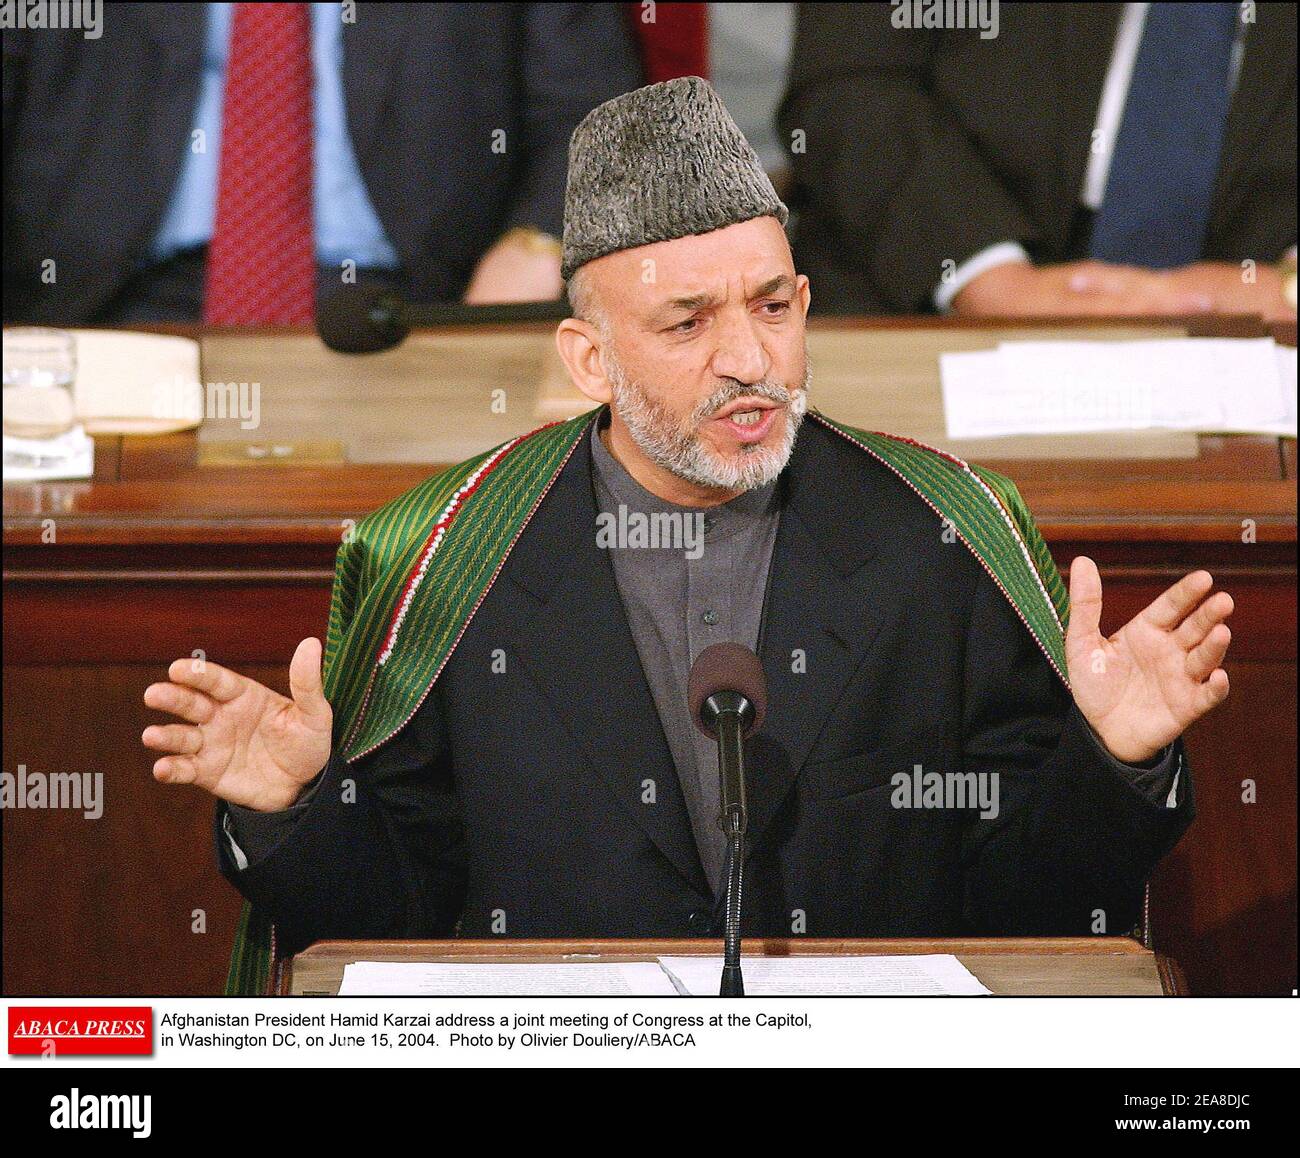 Afghanistan President Hamid Karzai address a joint meeting of Congress at the Capitol, in Washington DC, on June 15, 2004. Photo by Olivier Douliery/ABACA Stock Photo